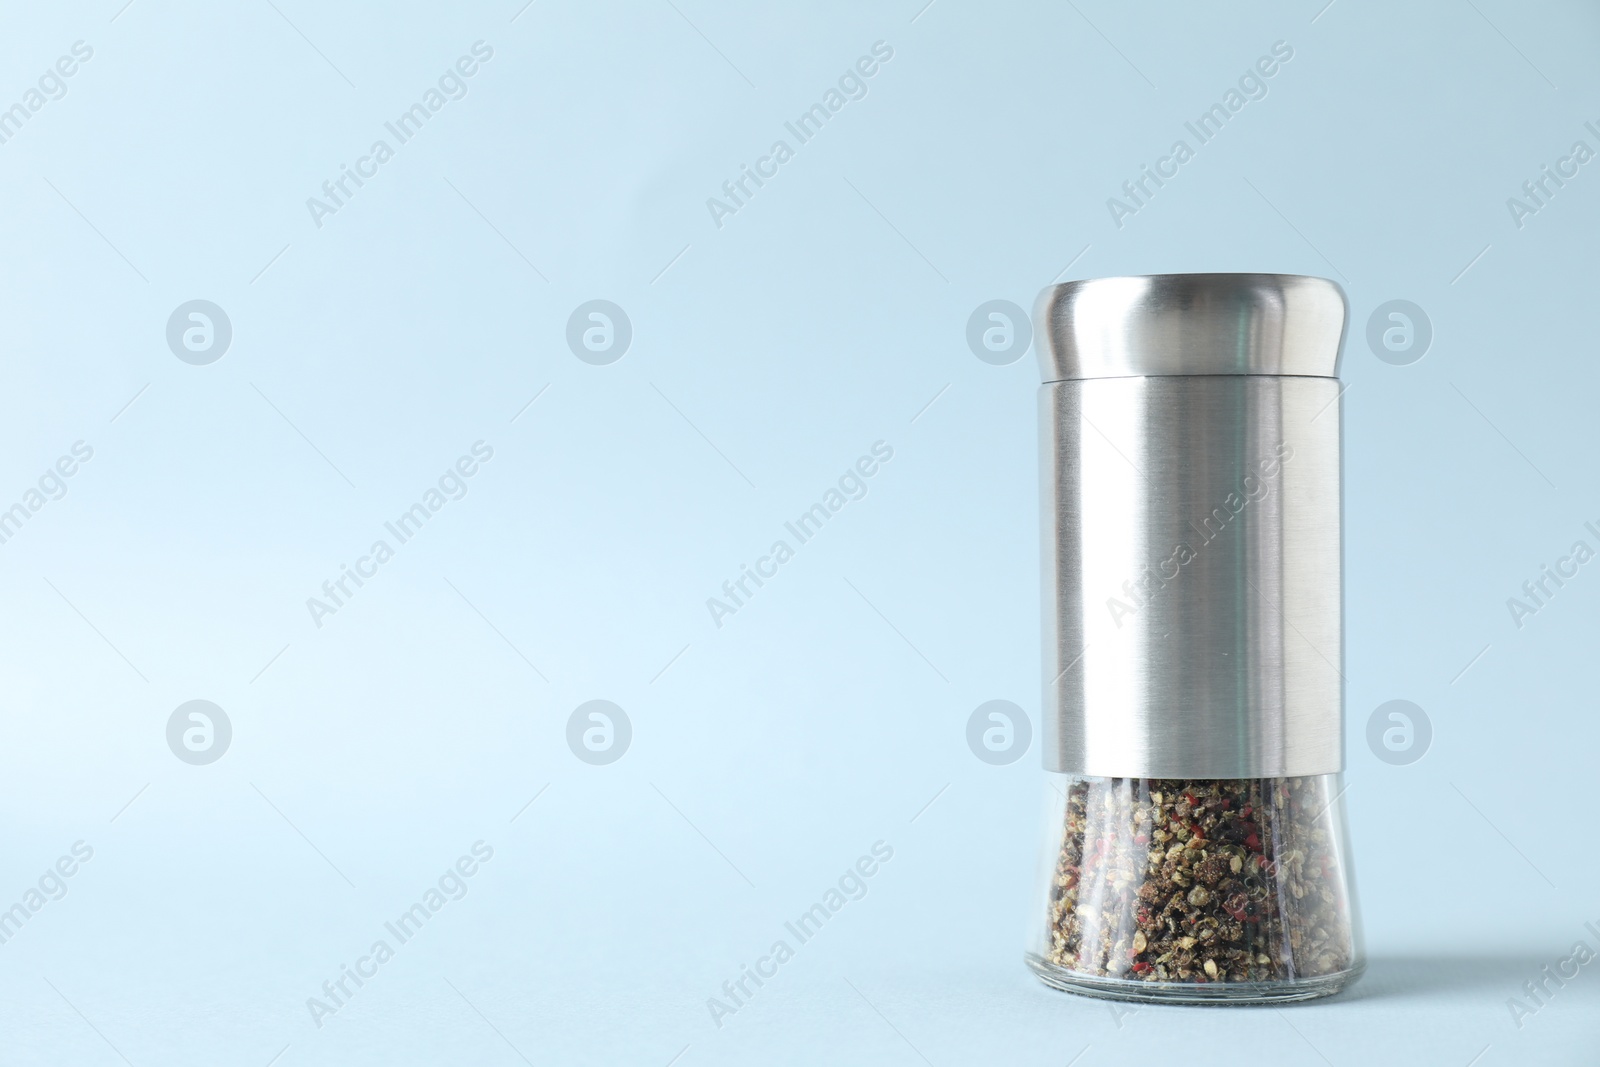 Photo of Pepper shaker on light background. Space for text